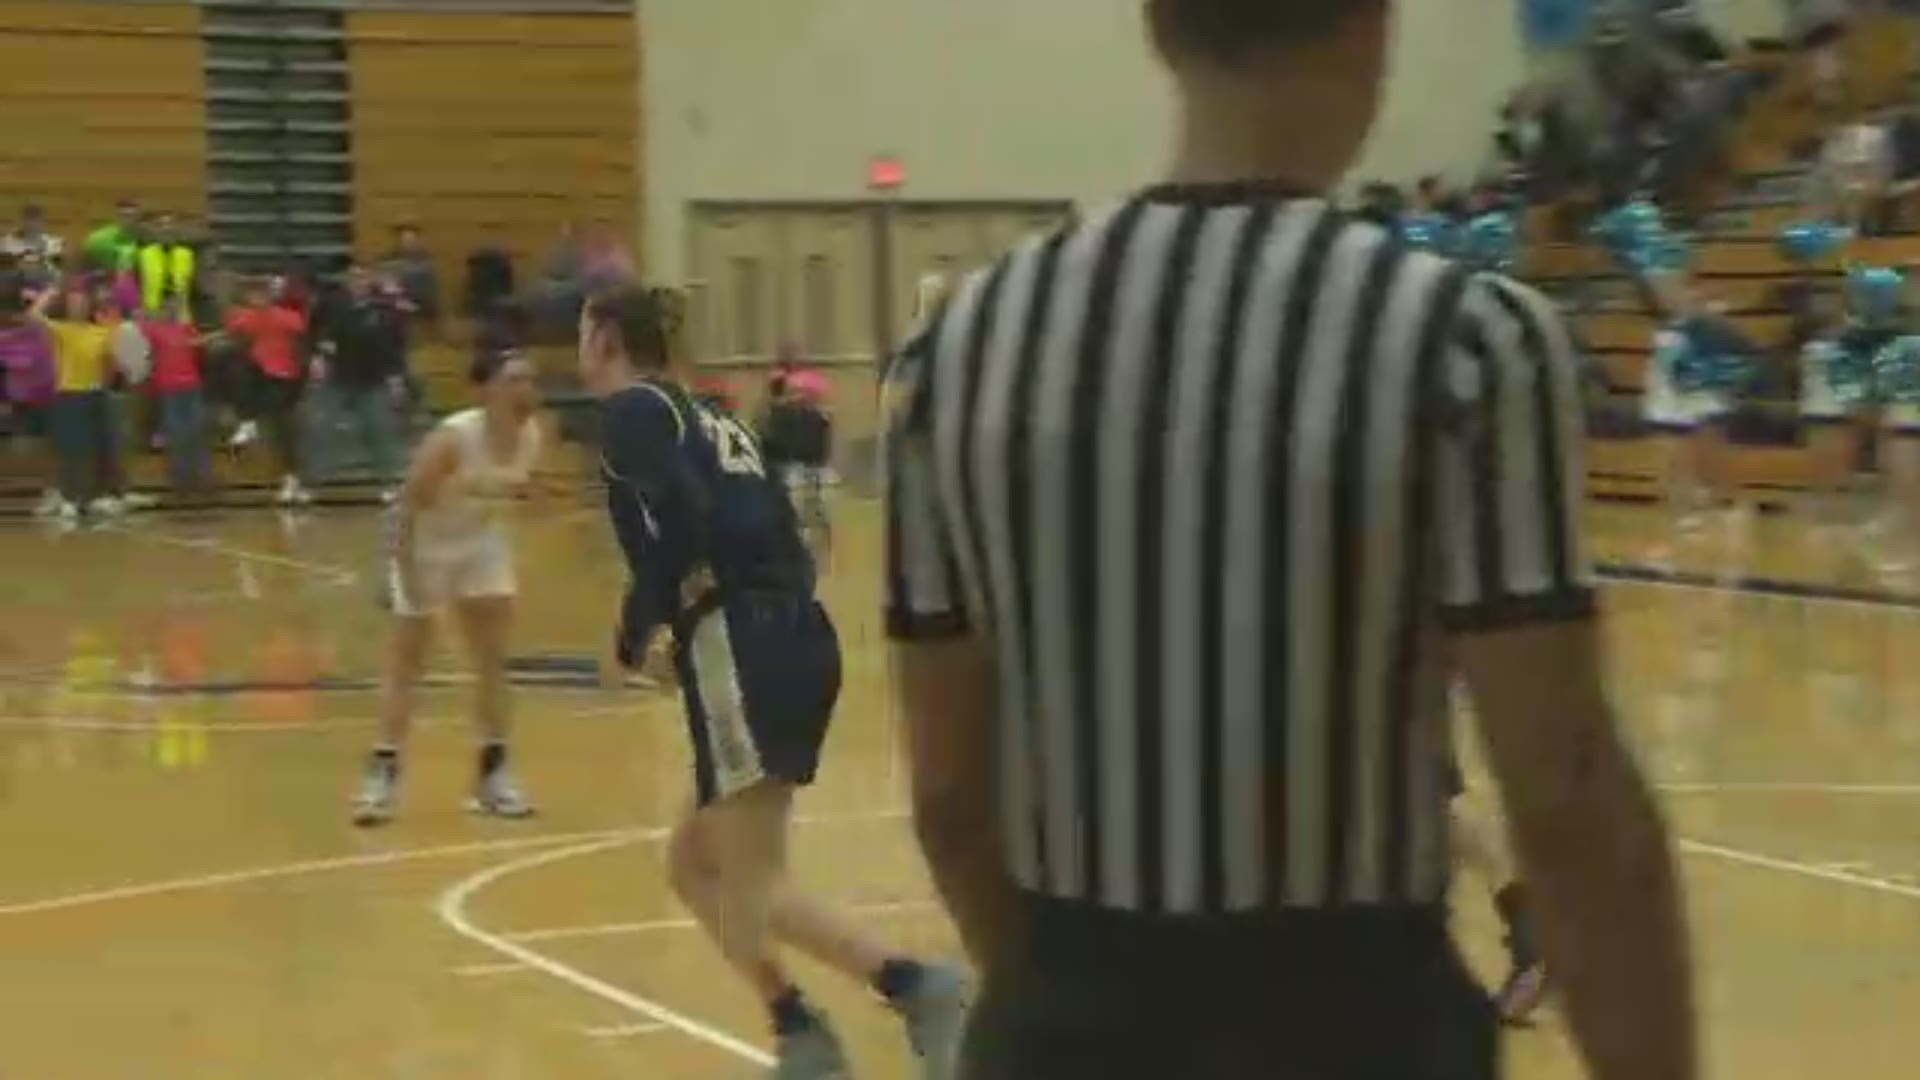 Highlights of No. 4 Liberty's 52-42 win over No. 13 Canby. Highlights are part of KGW's Friday Night Hoops with Orlando Sanchez.